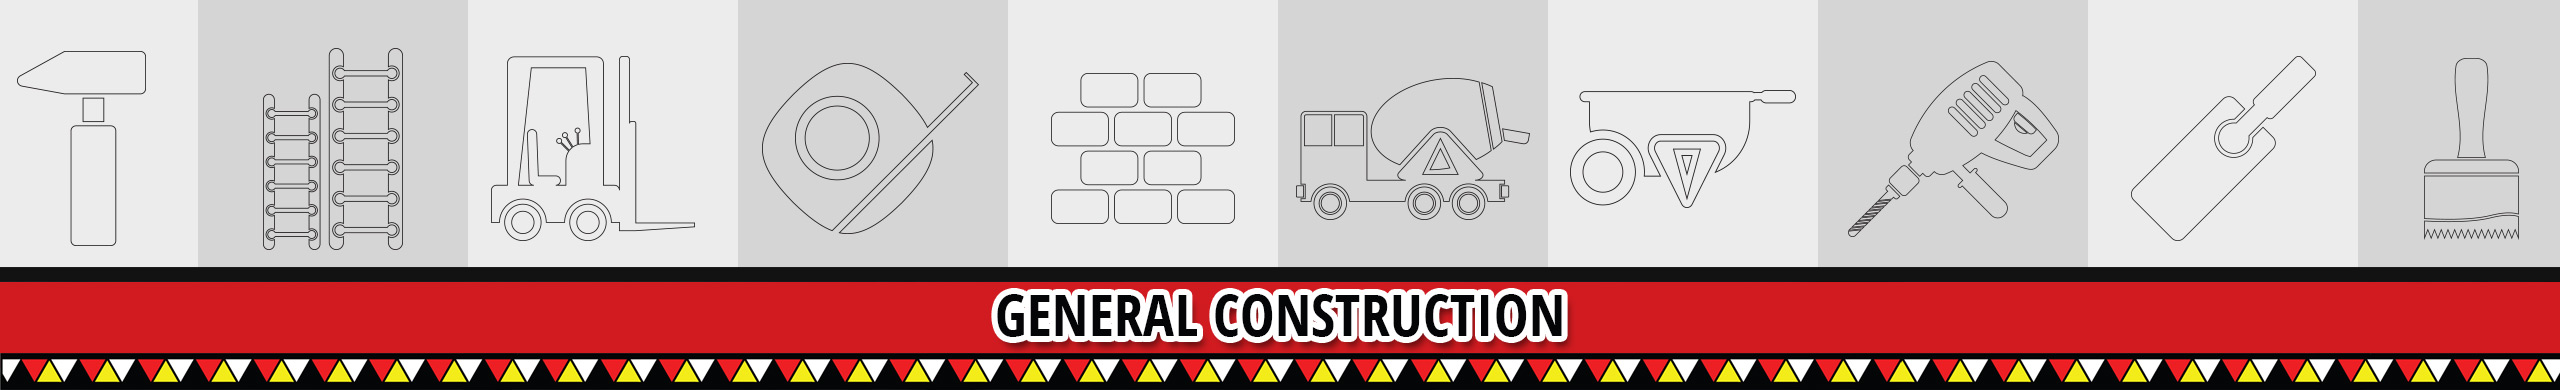 general construction page header